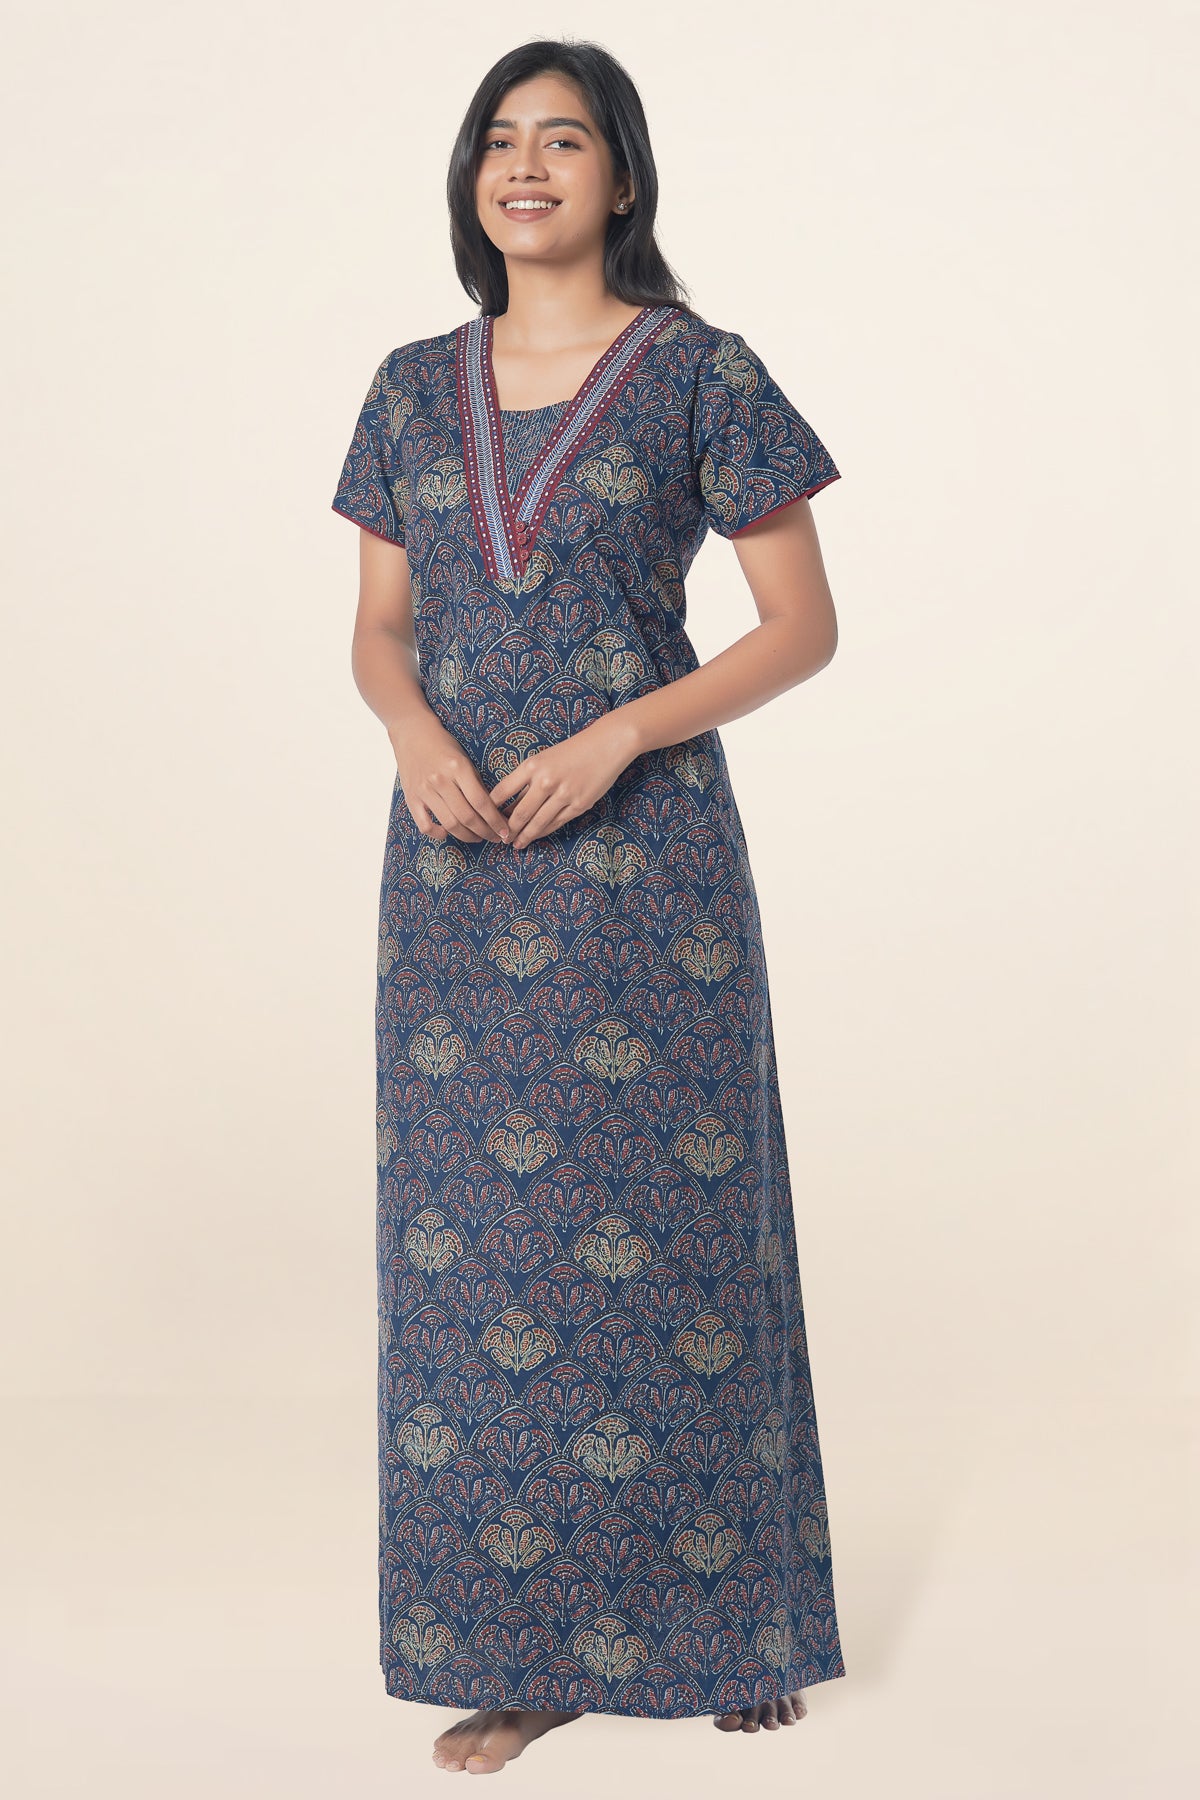 All Over Ajrak Printed With Yoke Embroidered Nighty - Blue